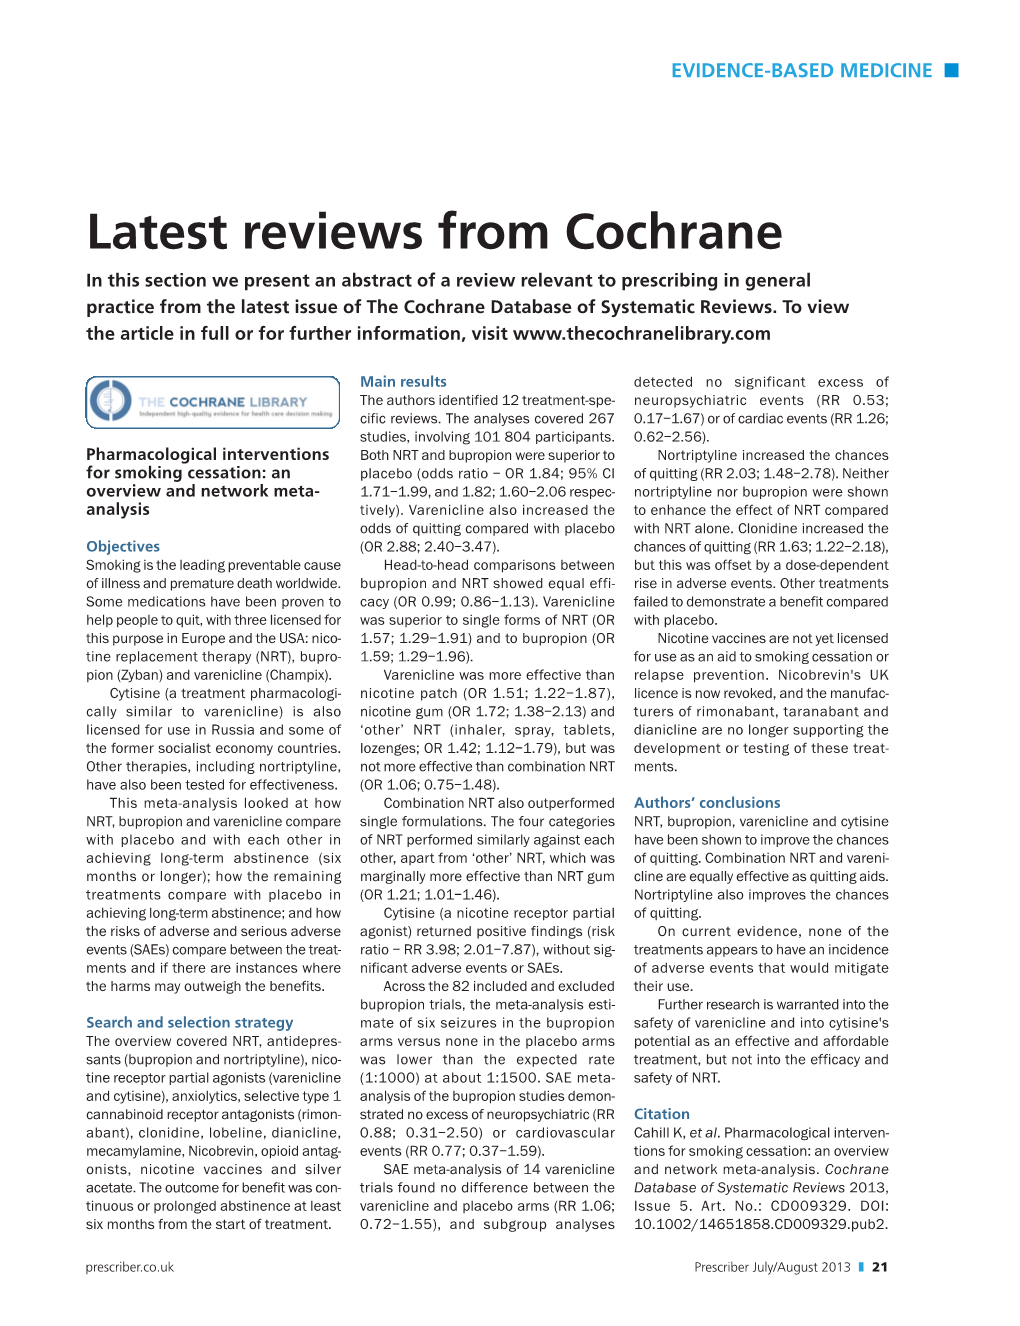 Latest Reviews from Cochrane